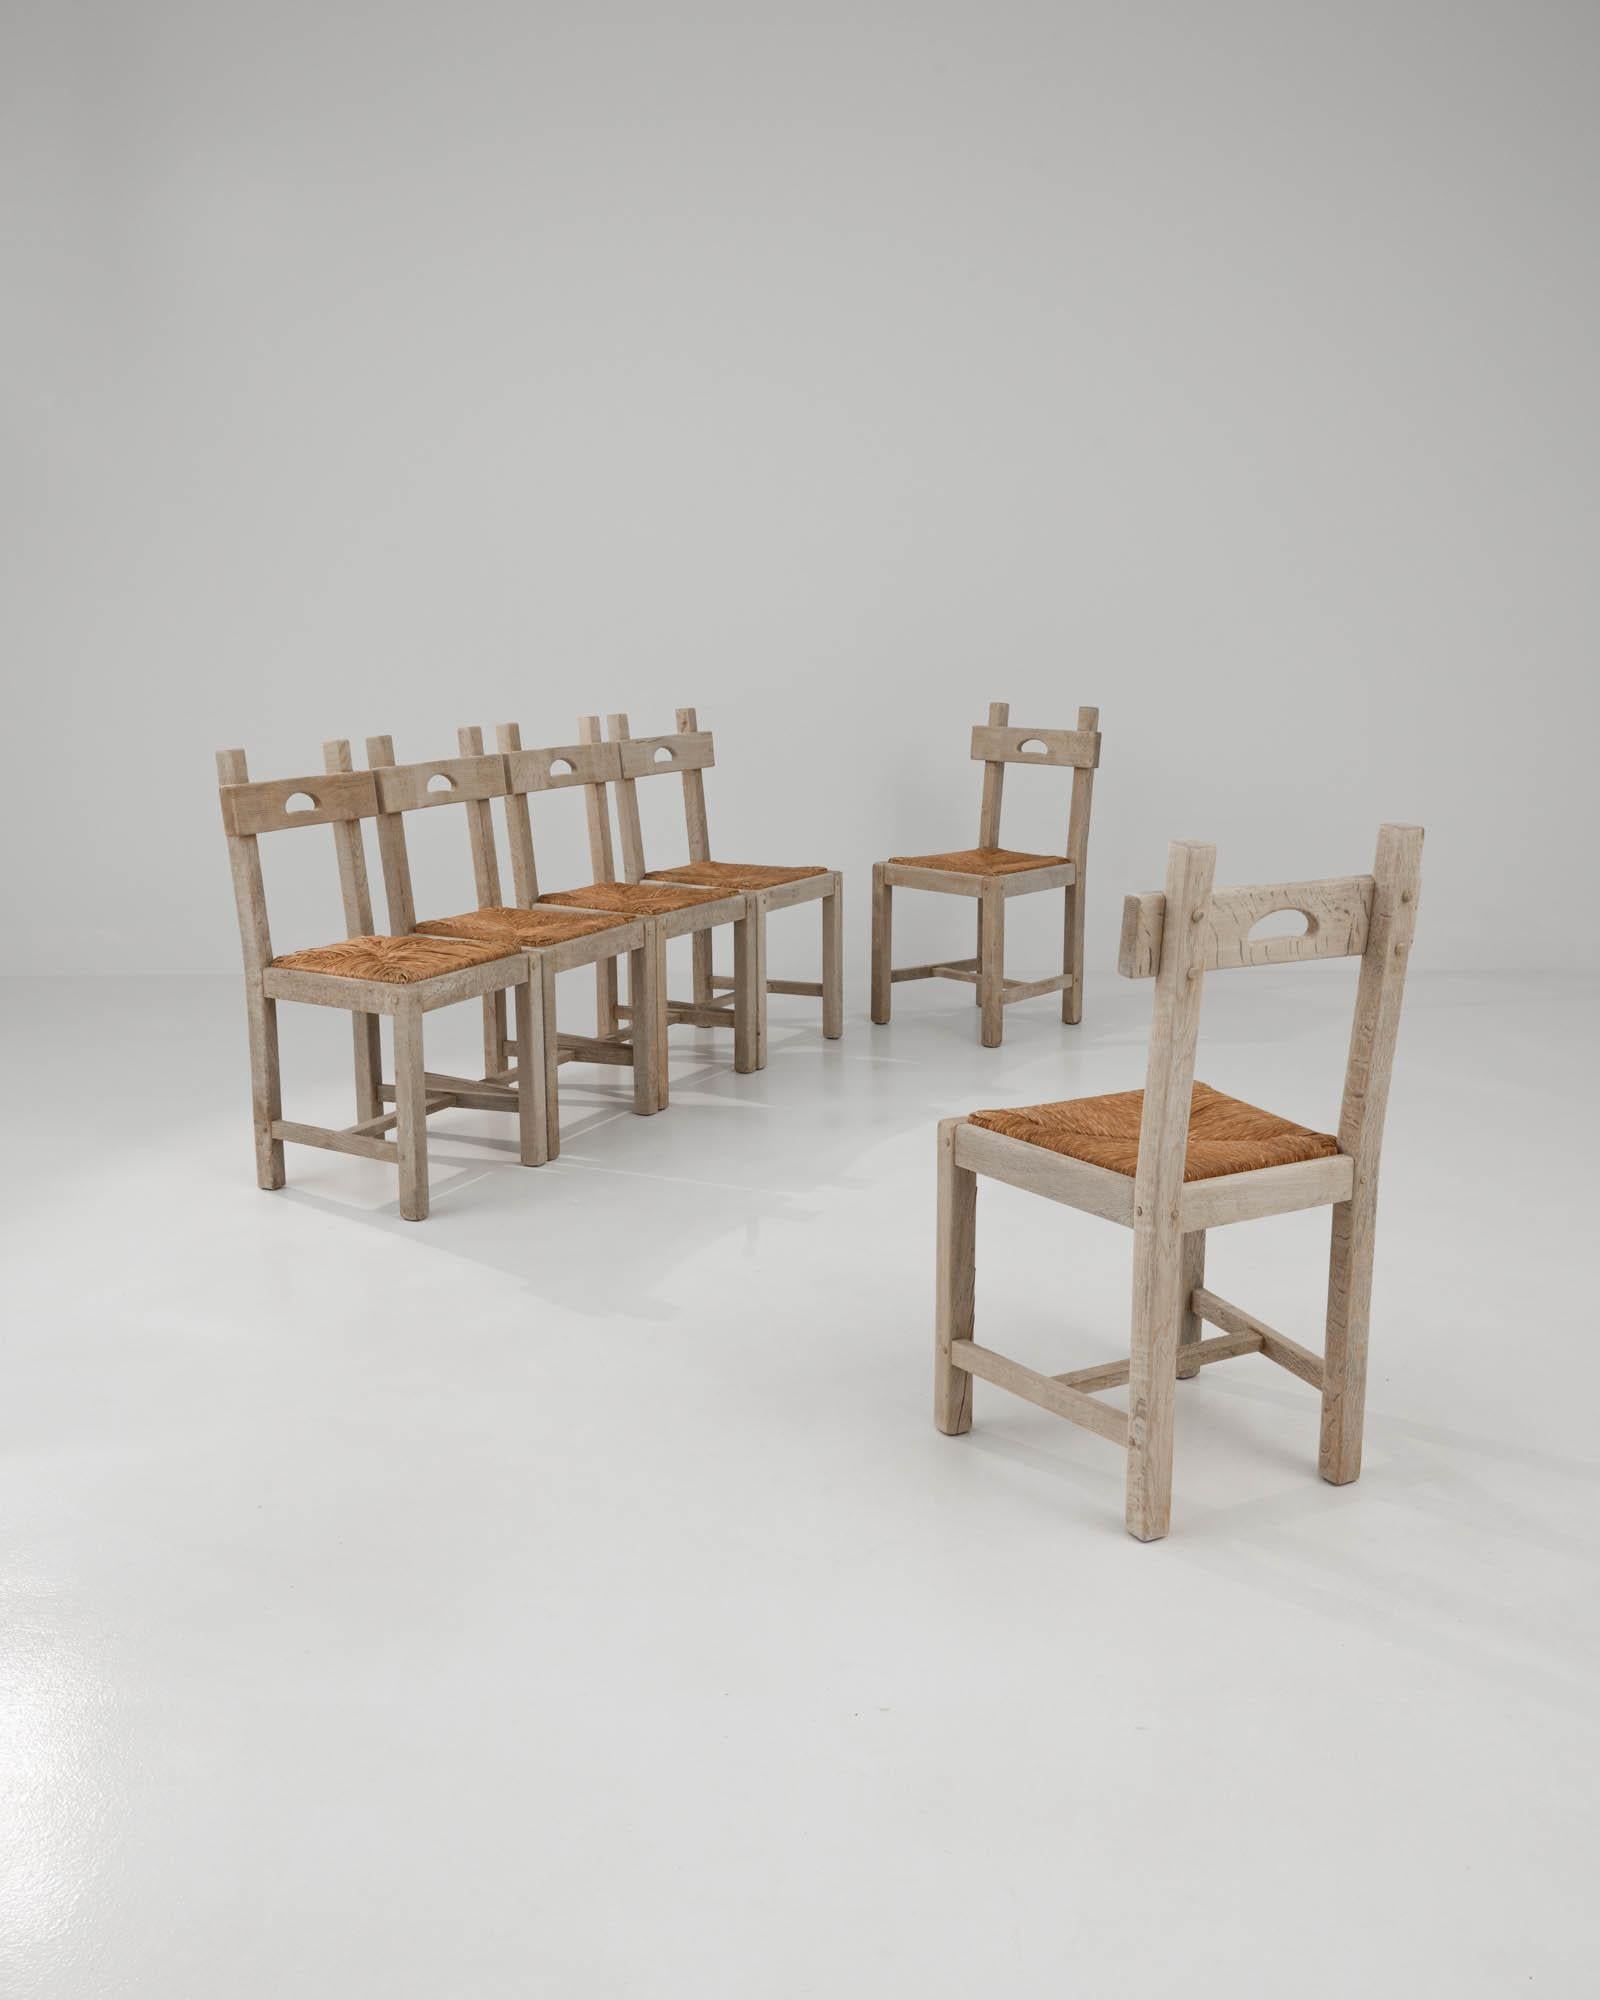 Homespun and charming. With woven seats and a pegged joint technique, this set of six oak dining chairs was crafted in a country style. Have a seat and take part in a laid-back occasion along with your guests. Bring your social gatherings images of